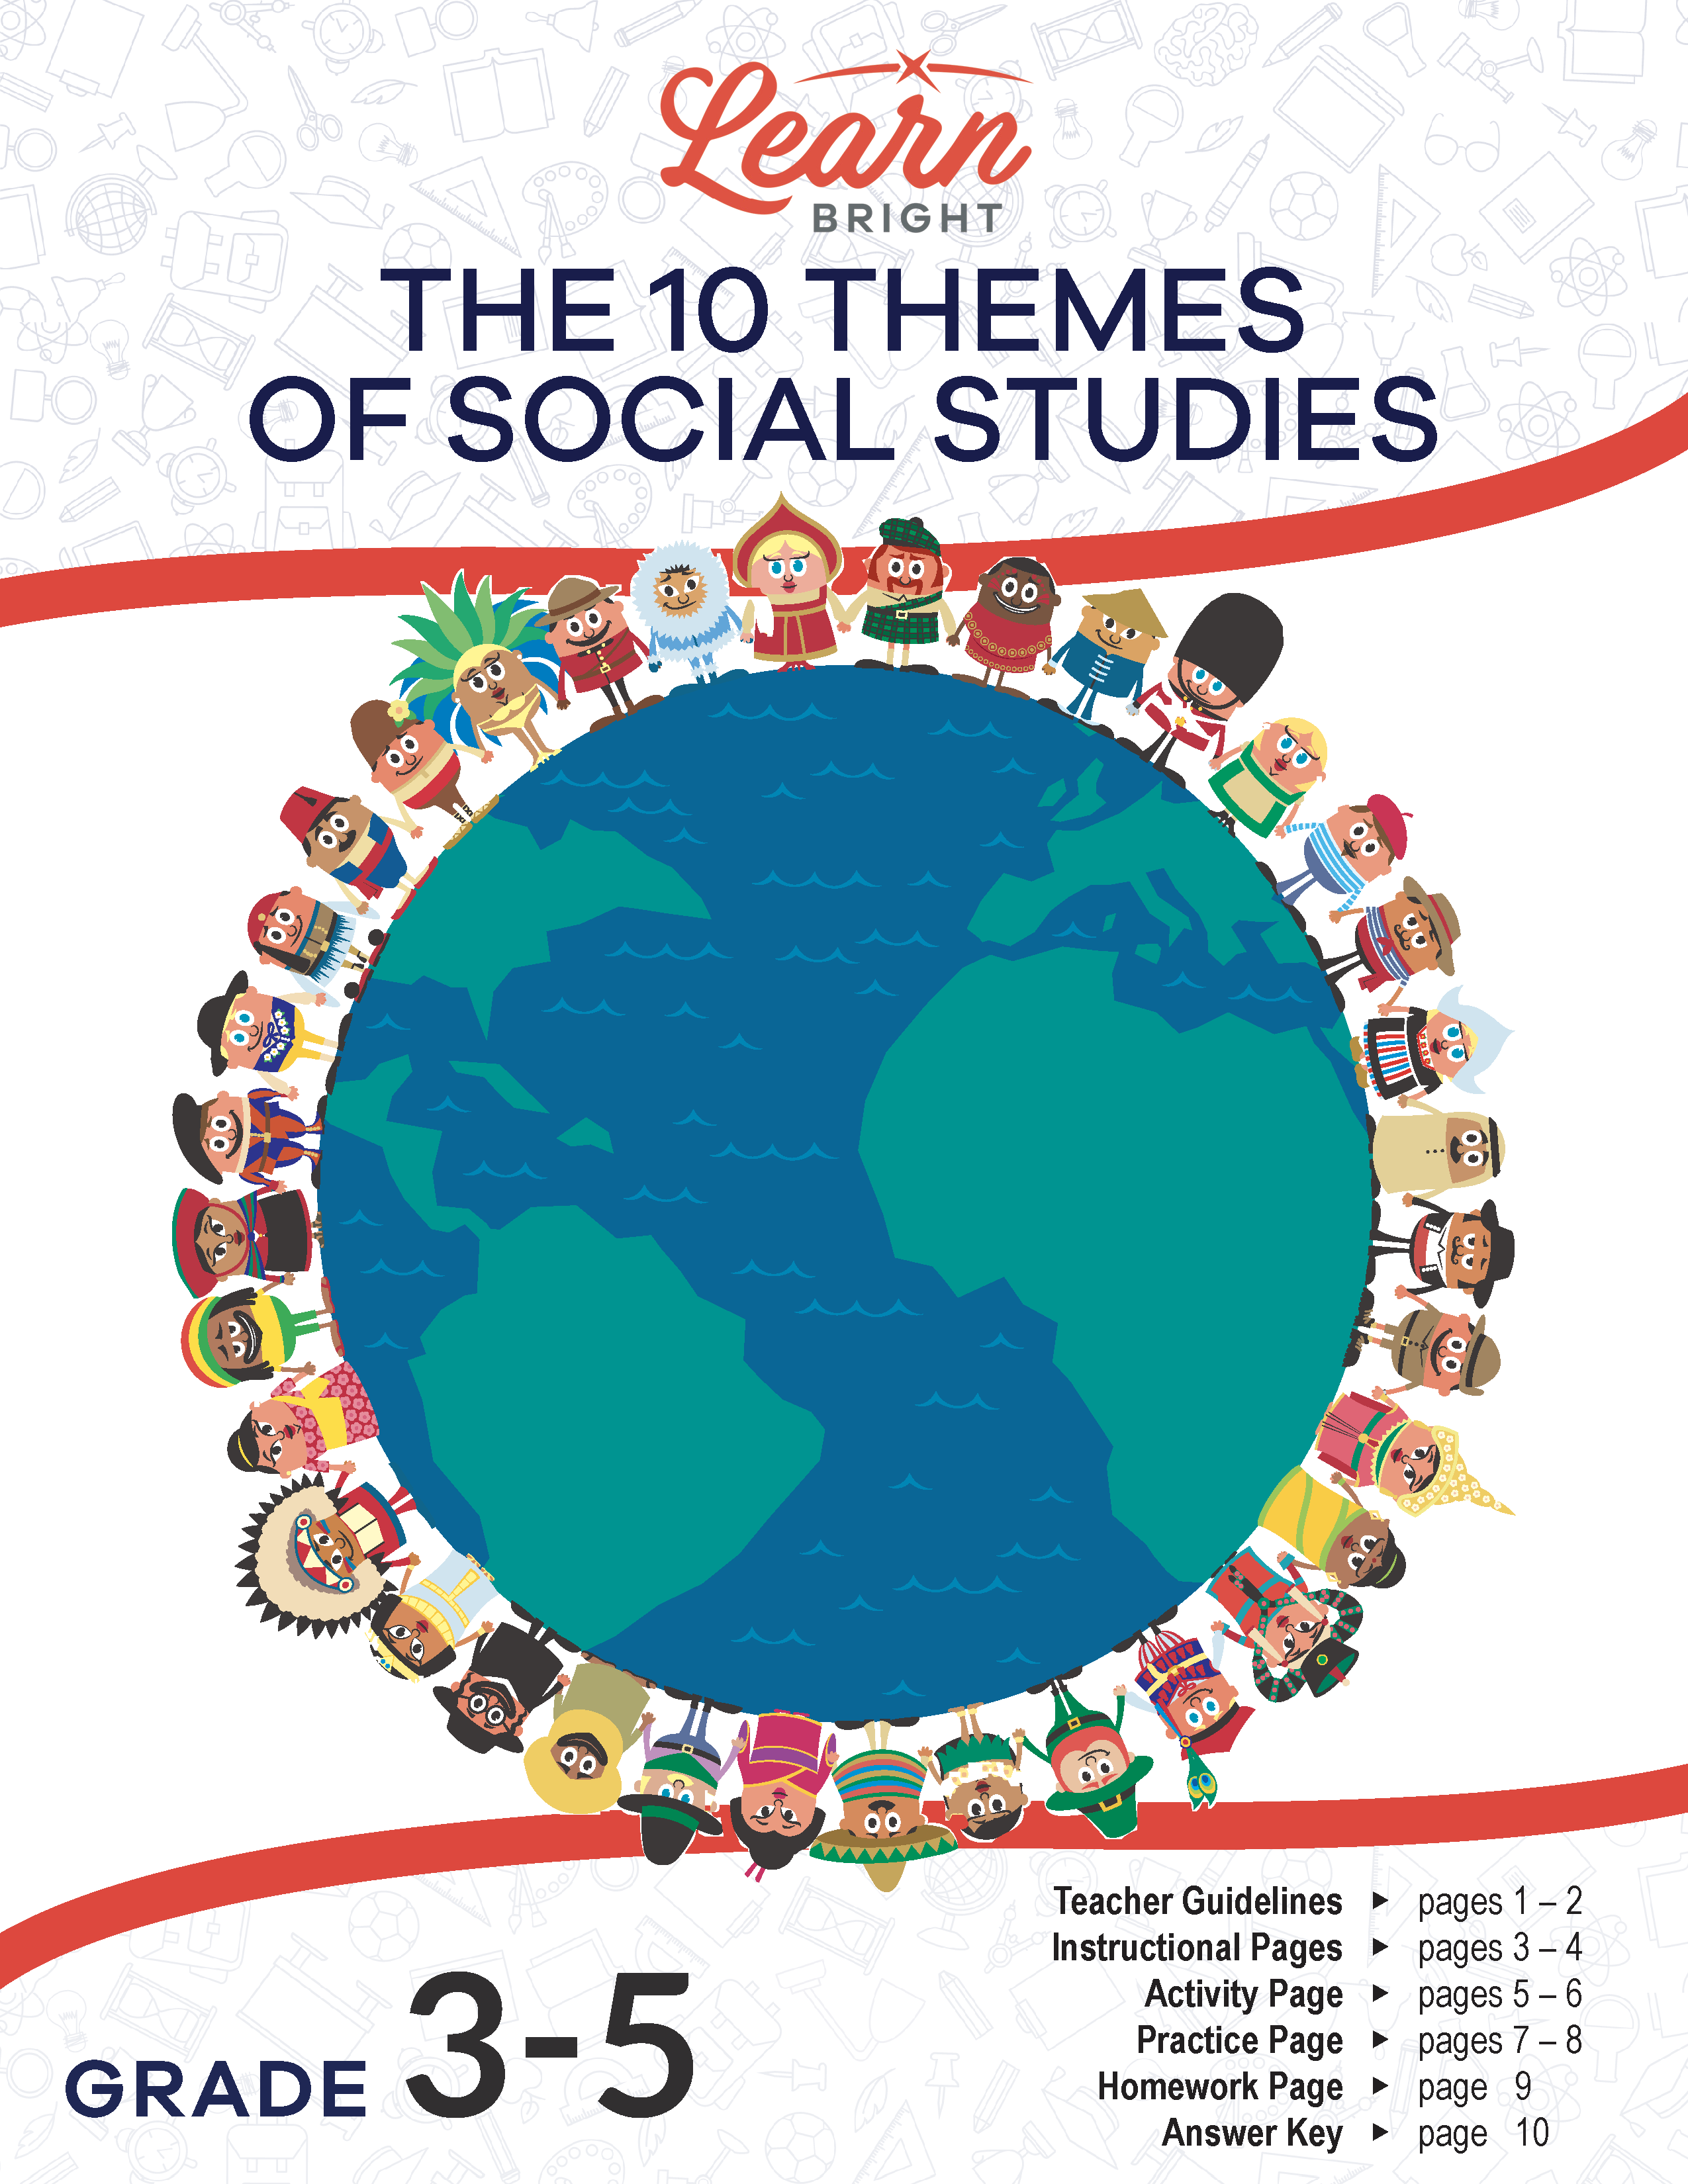 10 Themes of Social Studies, Free PDF Download Learn Bright